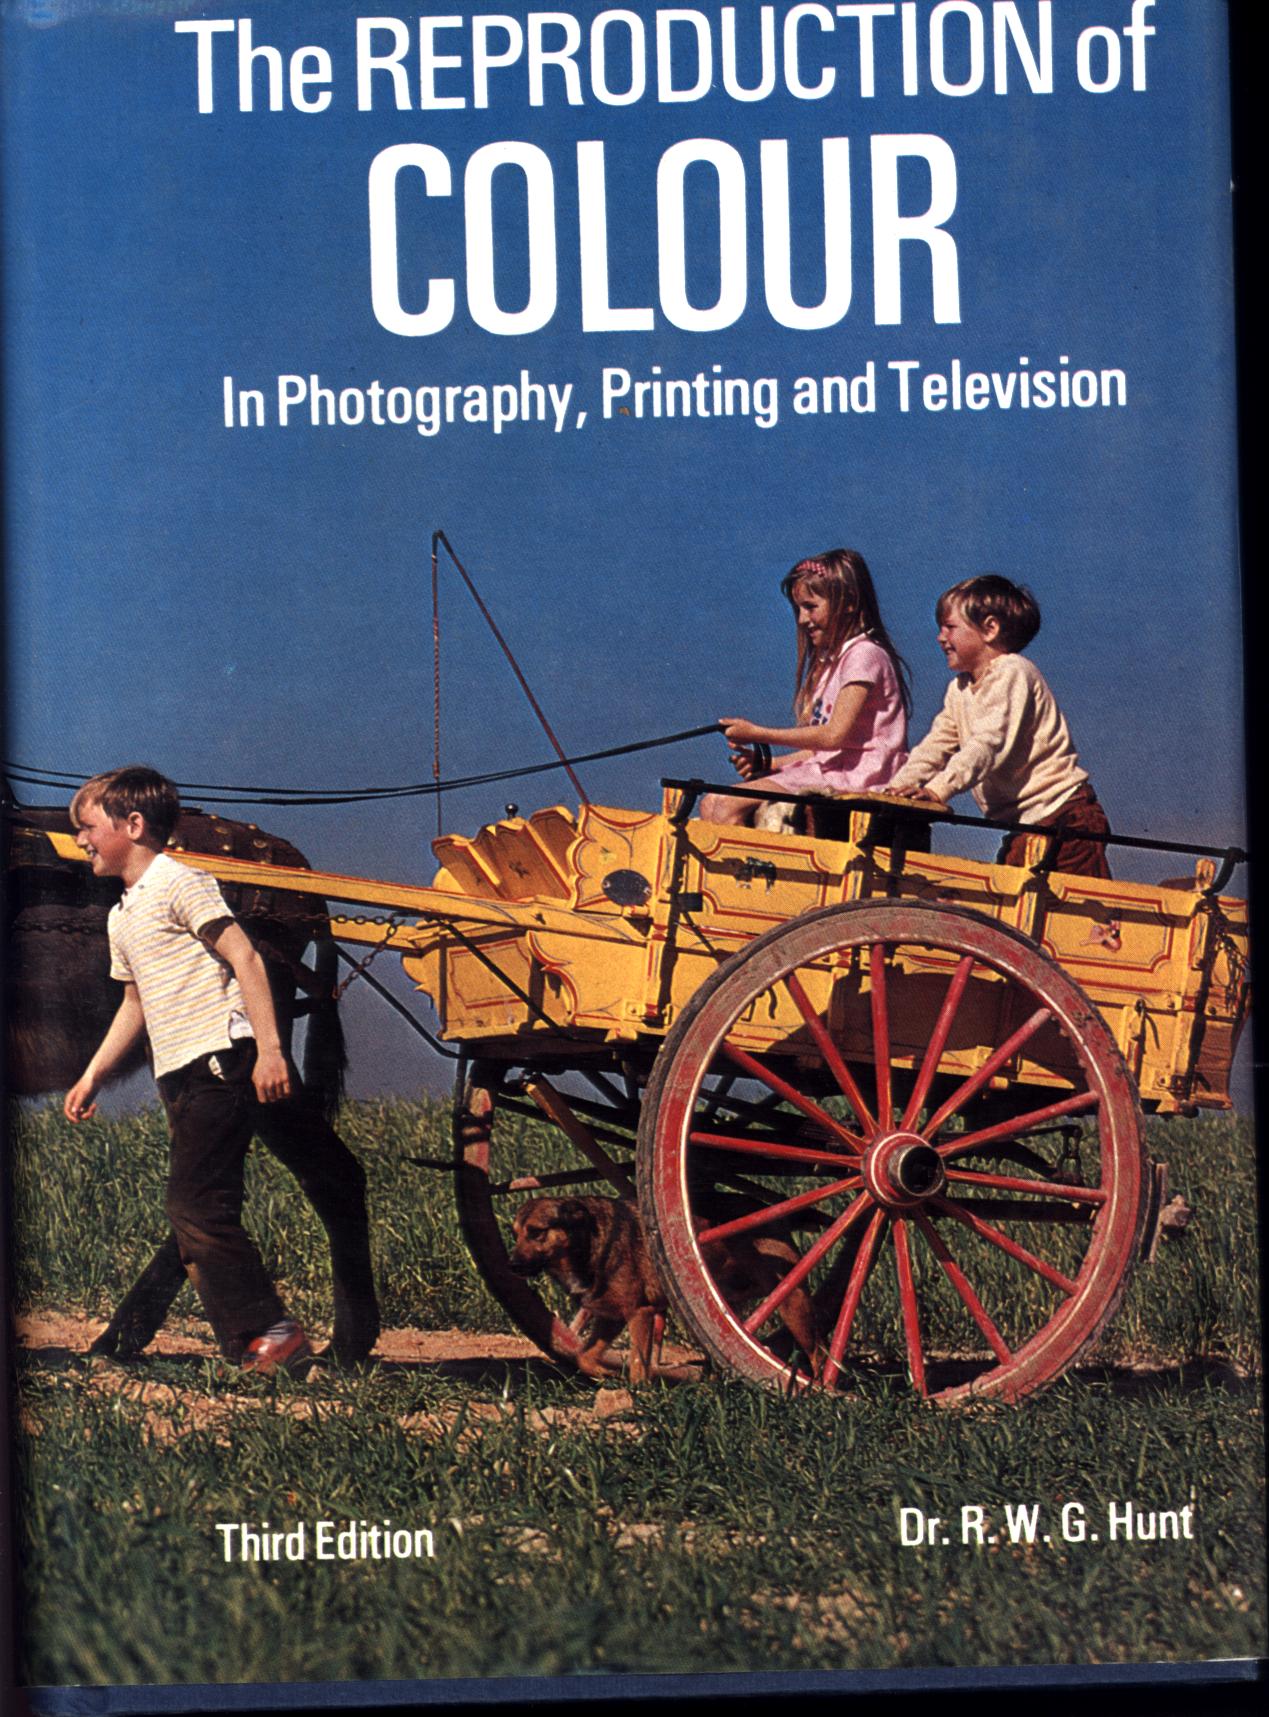 THE REPRODUCTION OF COLOUR in photography, printing and television.